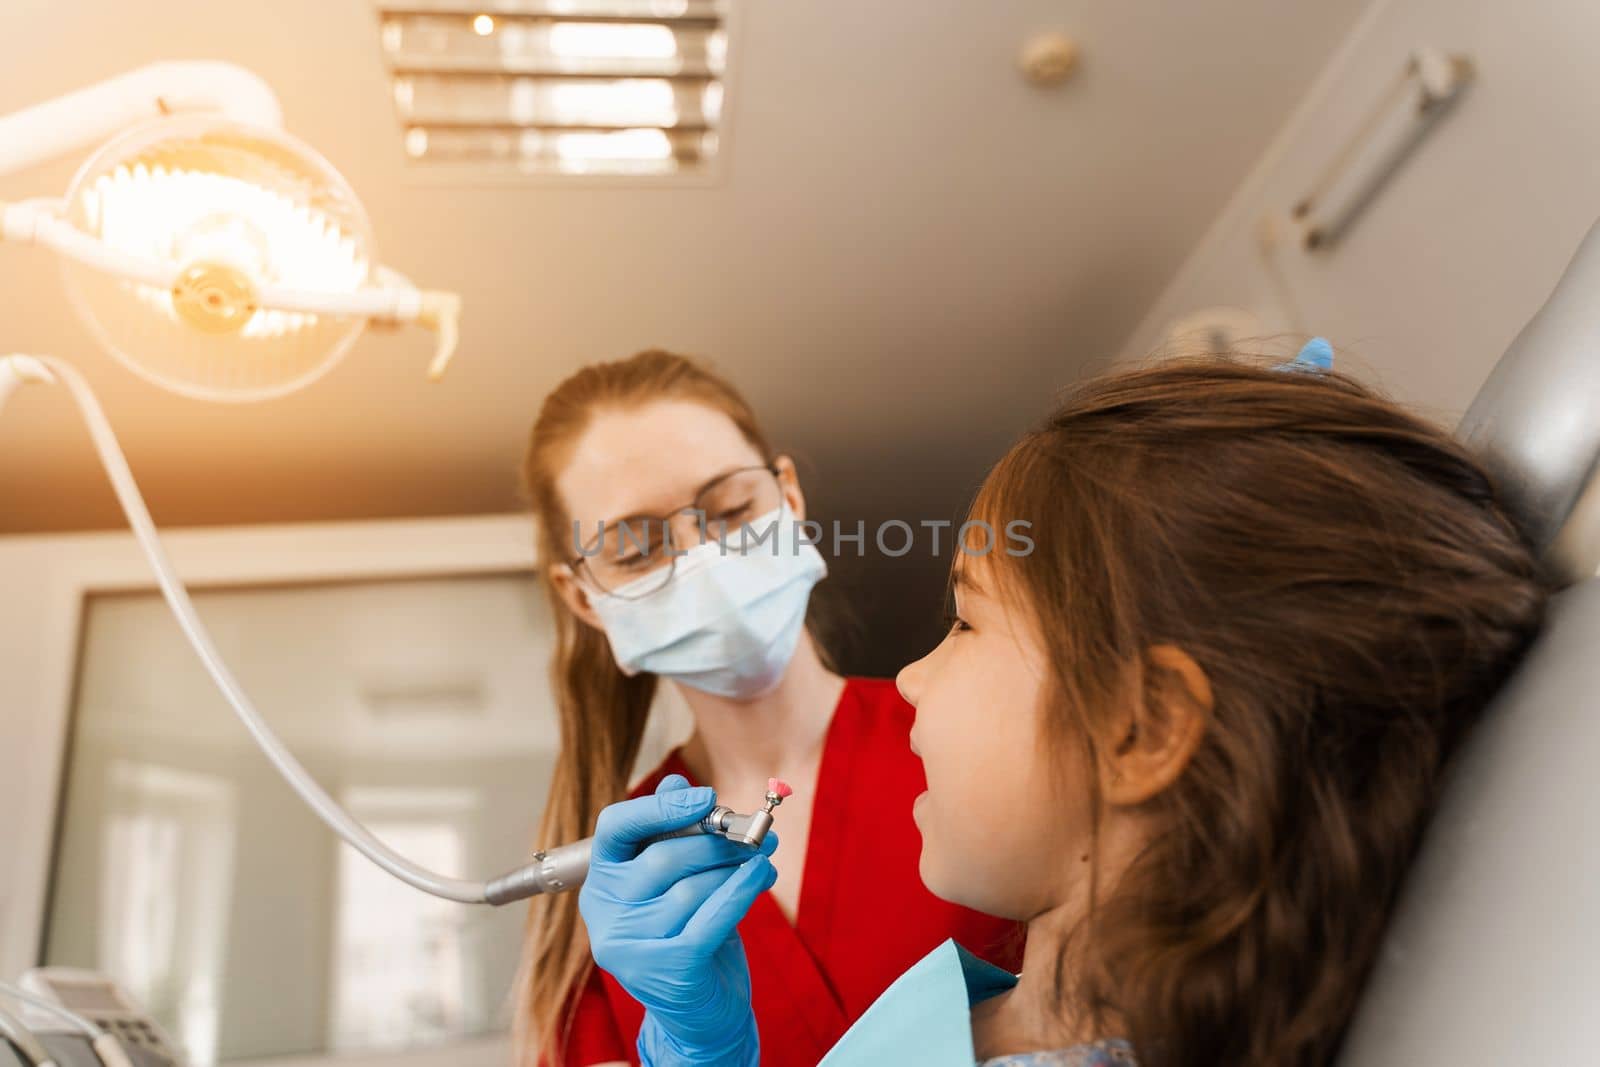 Child dentist makes professional teeth cleaning close-up in dentistry. Professional hygiene for teeth of child in dentistry. Pediatric dentist examines and consults kid patient in dentistry